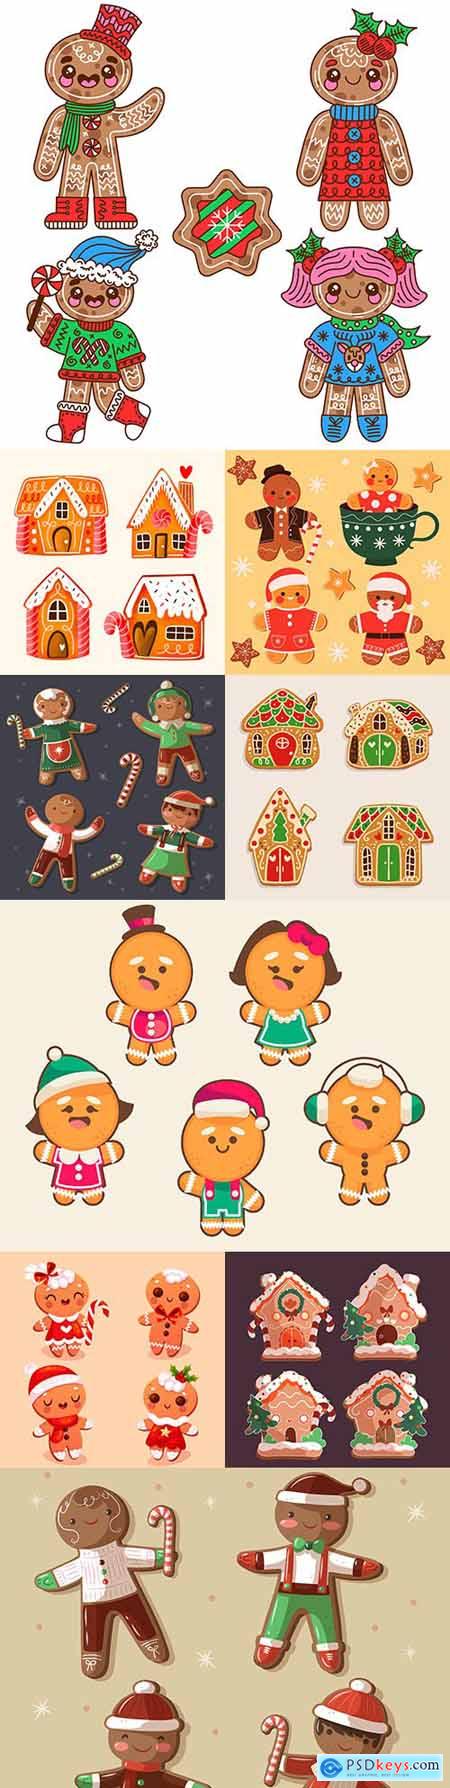 Painted gingerbread man and lodge collection Christmas illustrations